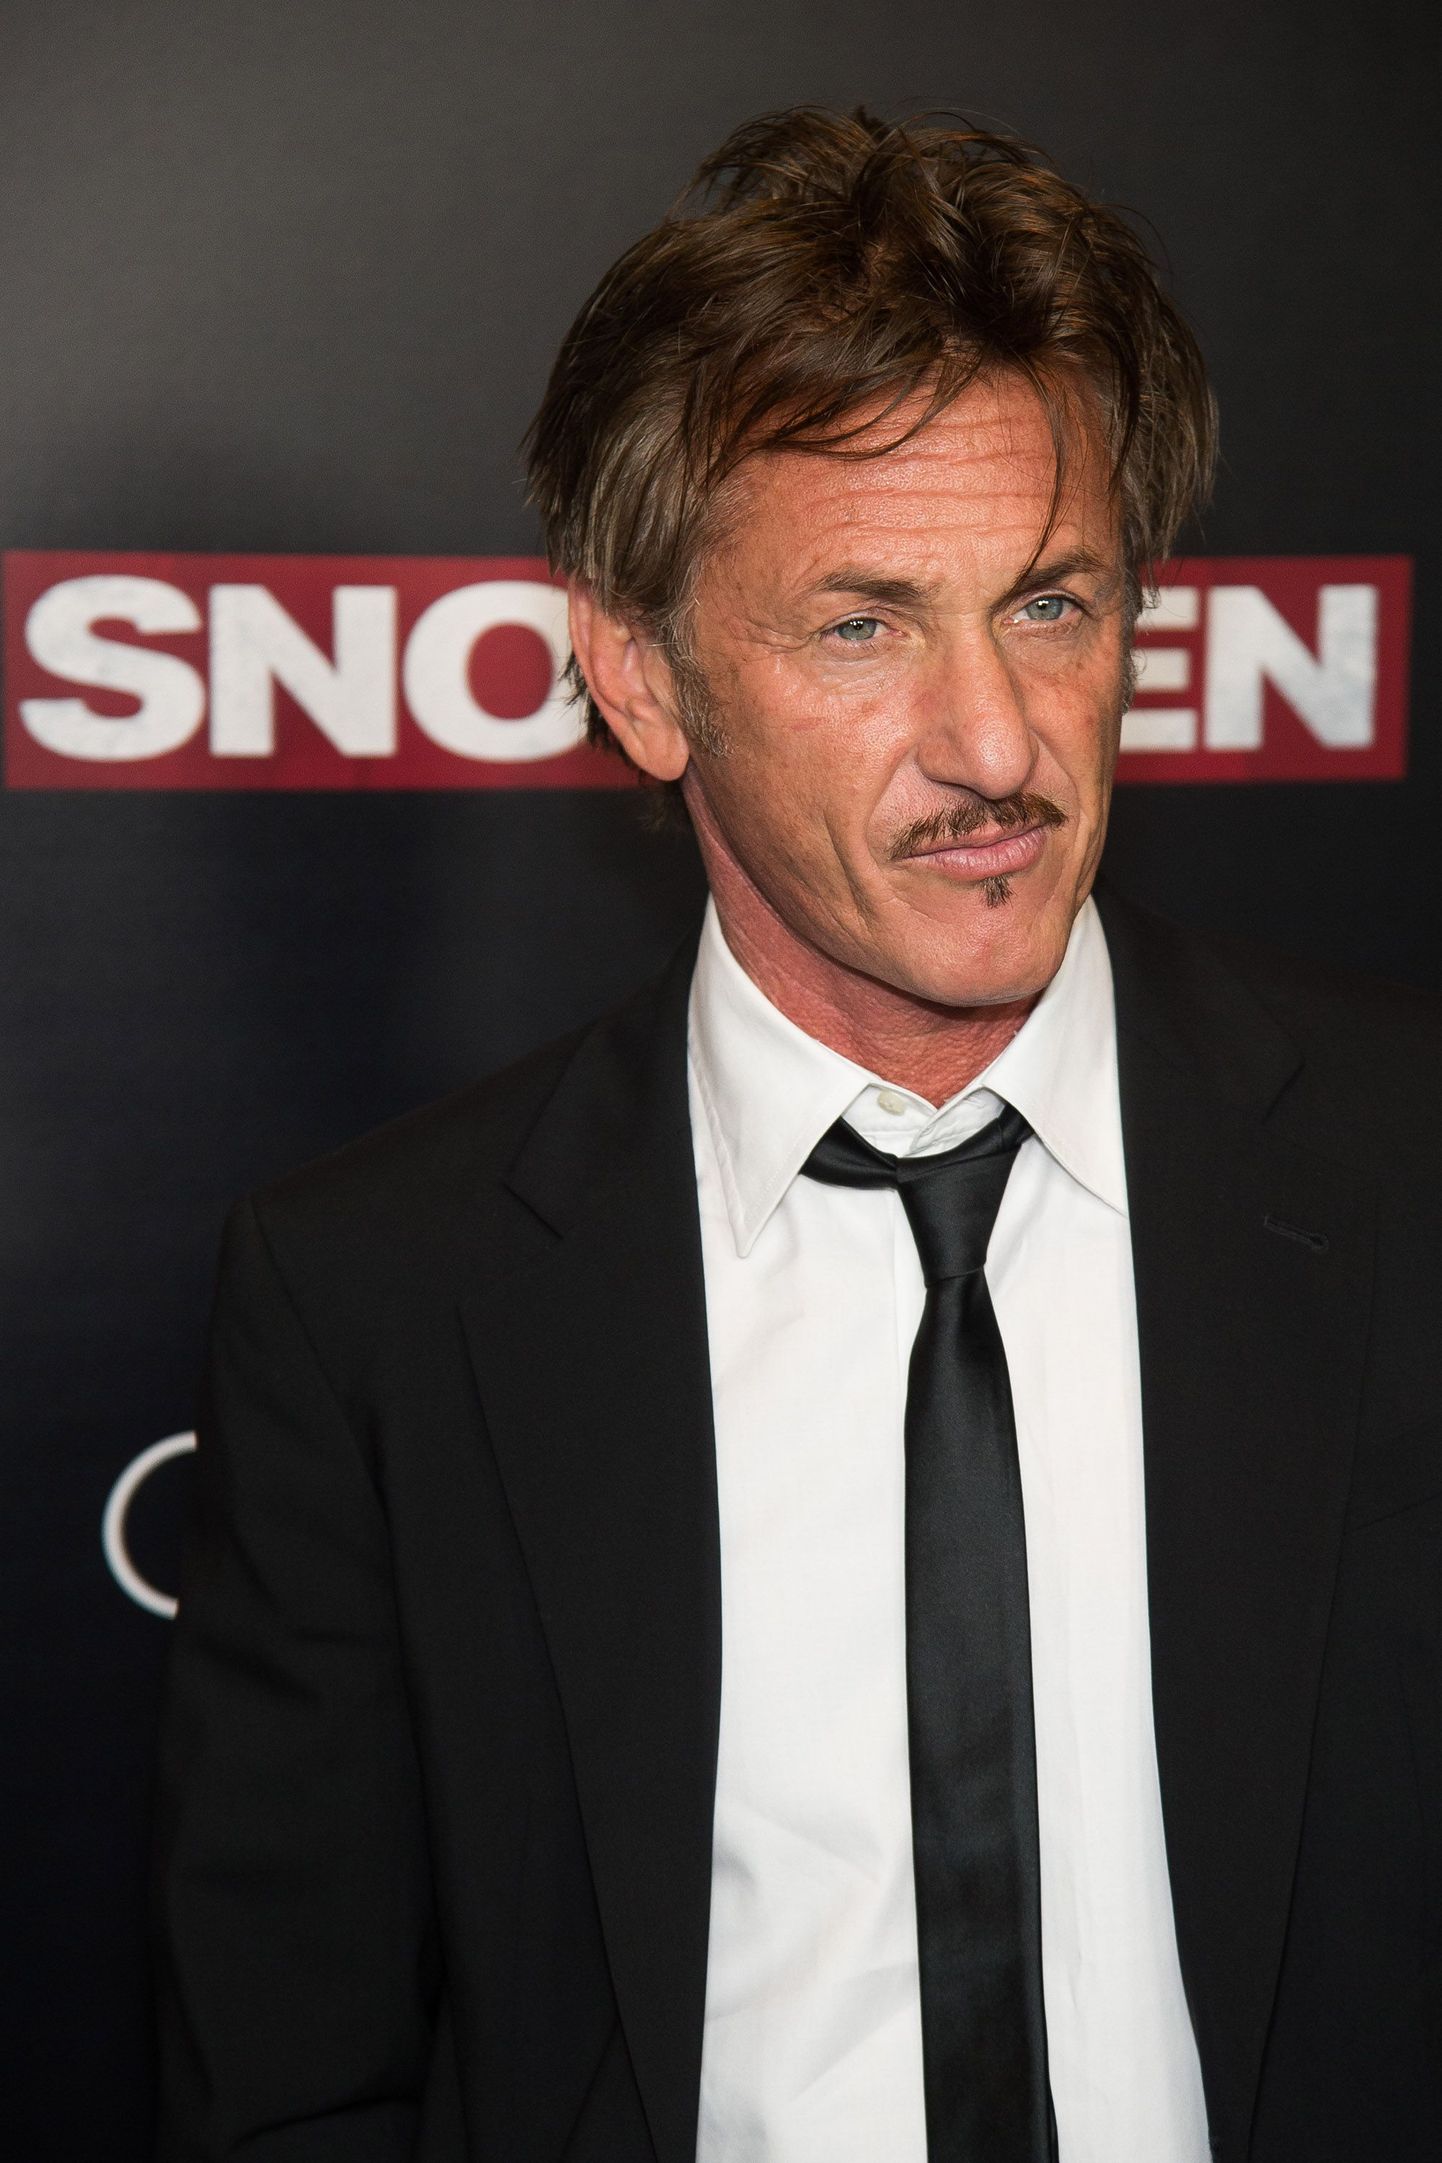 Sean Penn attends the premiere of "Snowden" at AMC Loews Lincoln Square on Tuesday, Sept. 13, 2016, in New York. (Photo by Charles Sykes/Invision/AP)